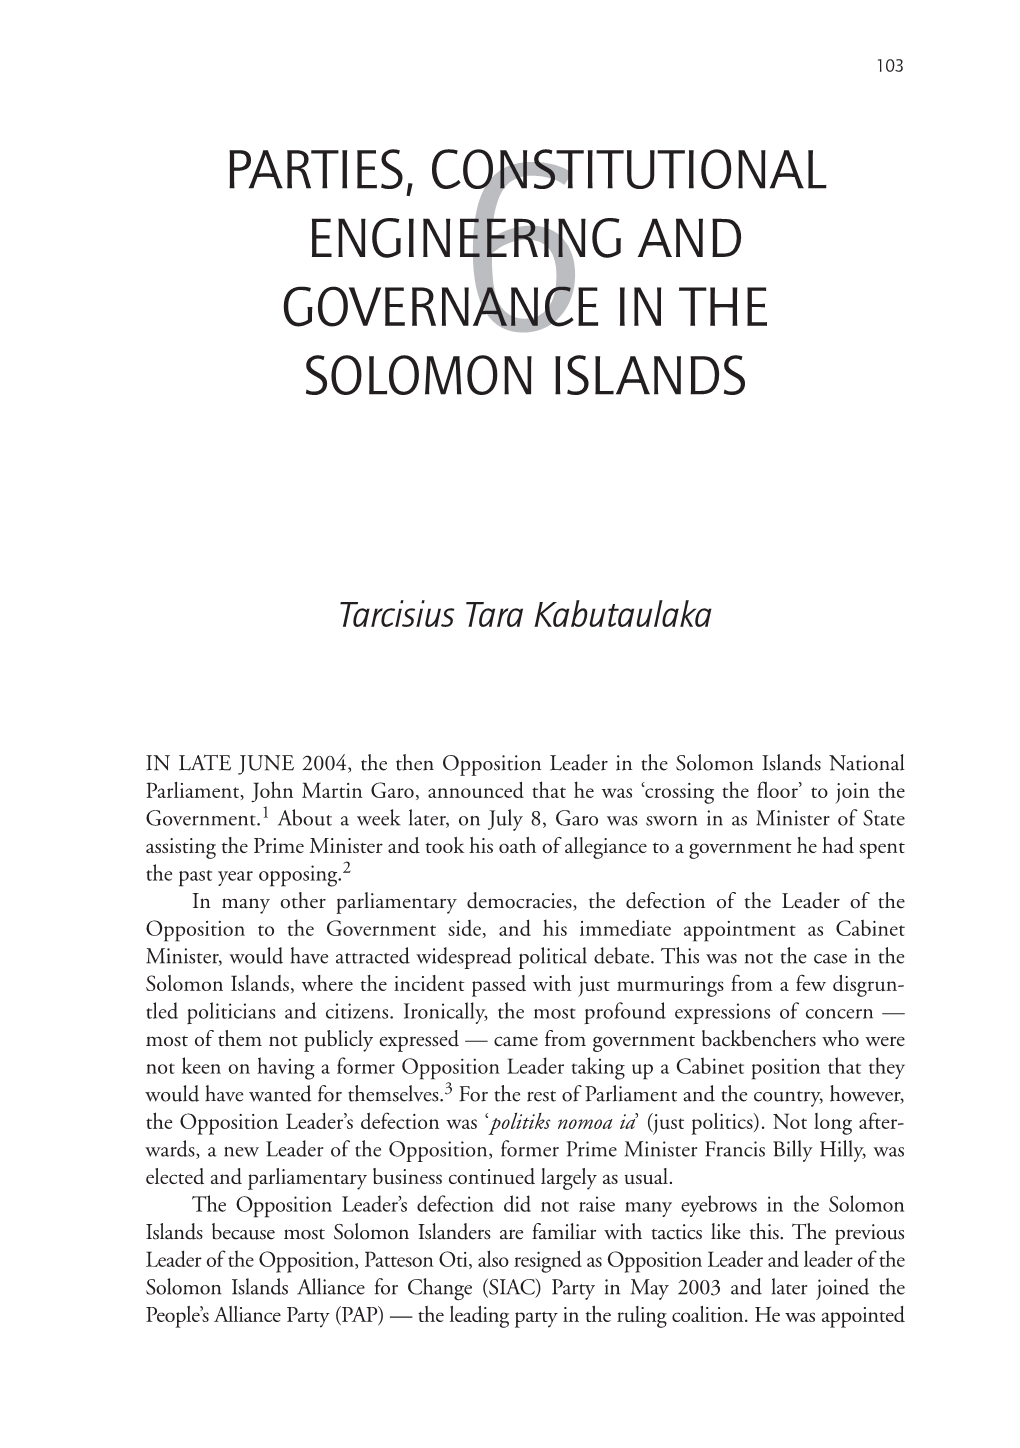 Parties, Constitutional Engineering and Governance in the Solomon Islands 105